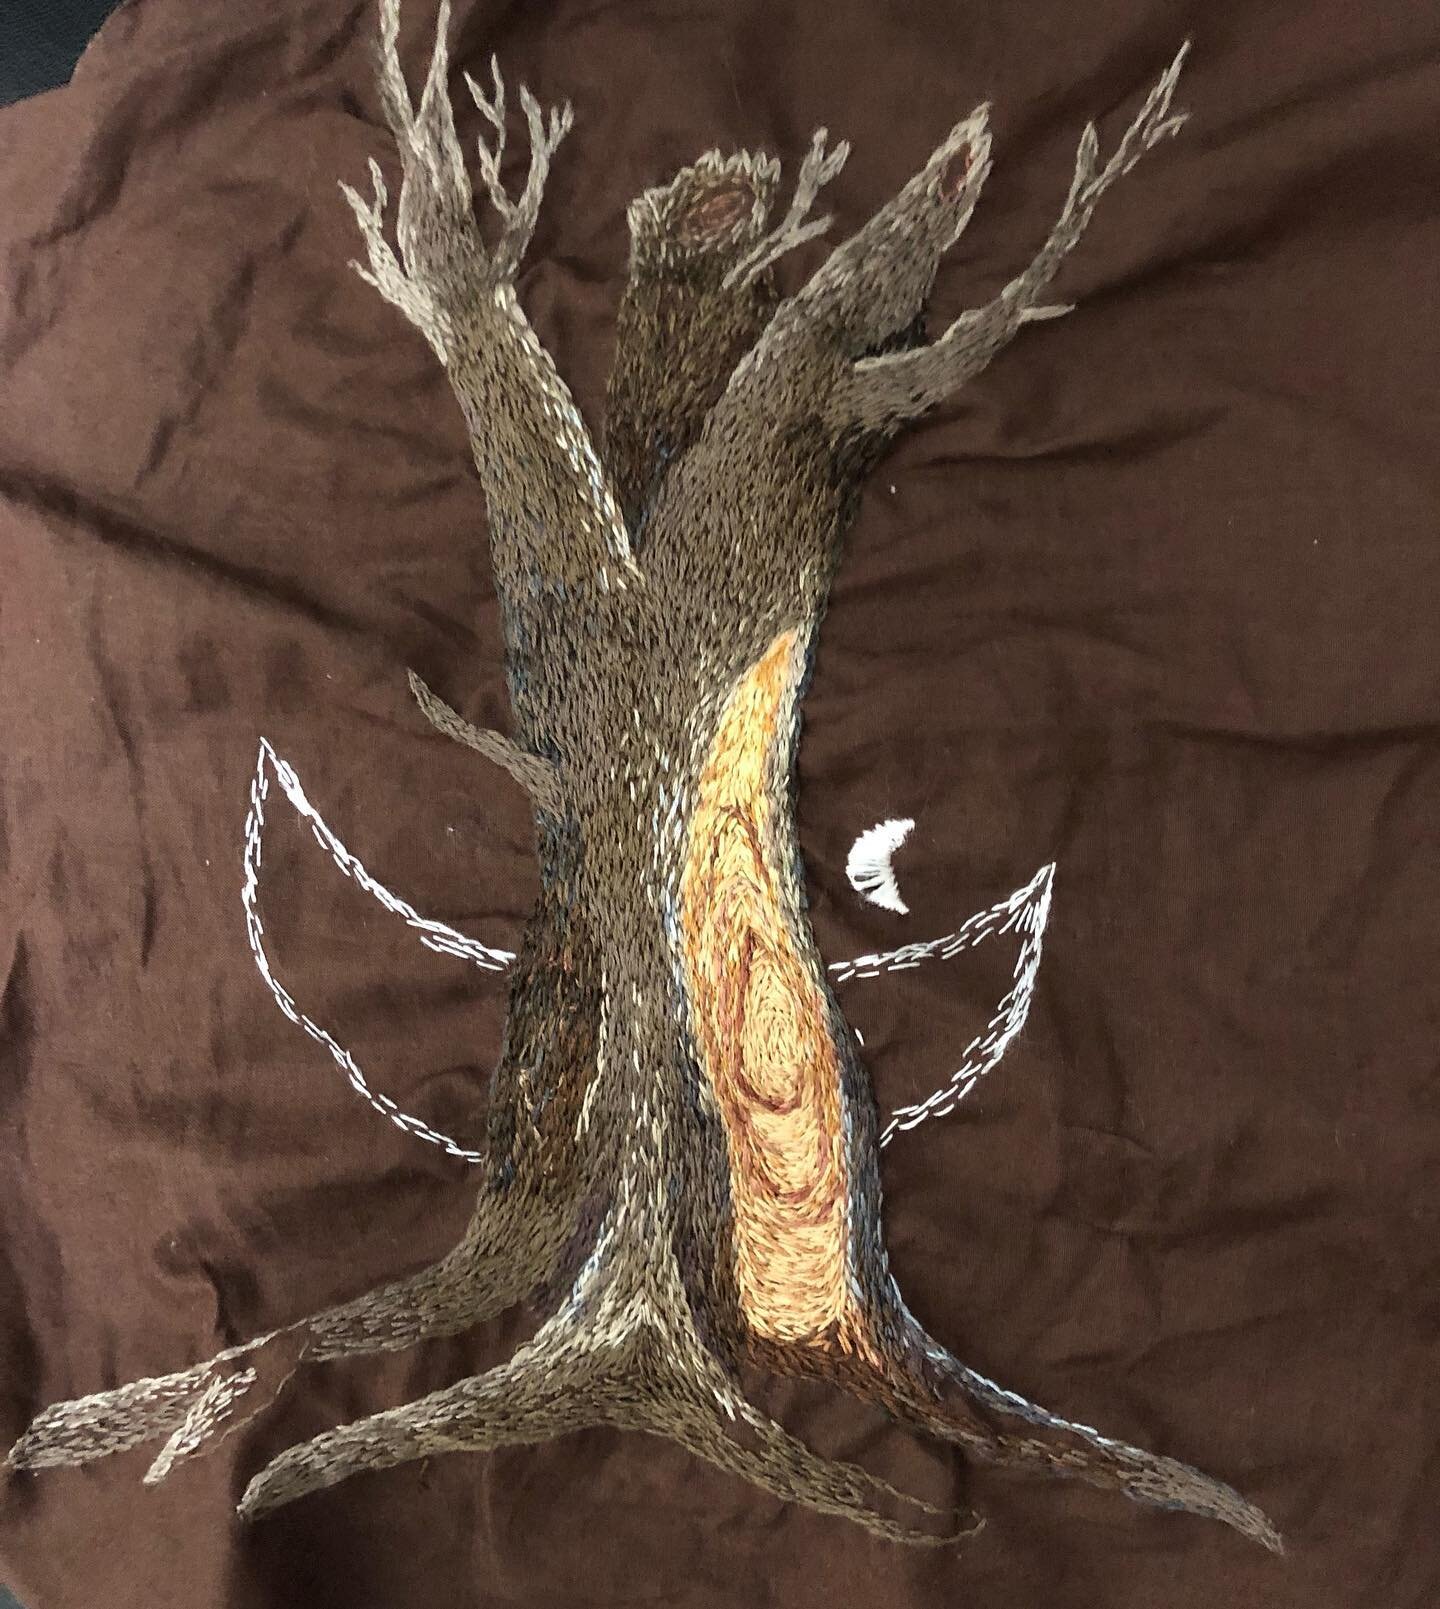 Current work in progress.  An embroidery #appliqué  #tree that is going to be applied to a #sorceress #cape #needlepainting #moon #magic #alchemy #dmcthreads